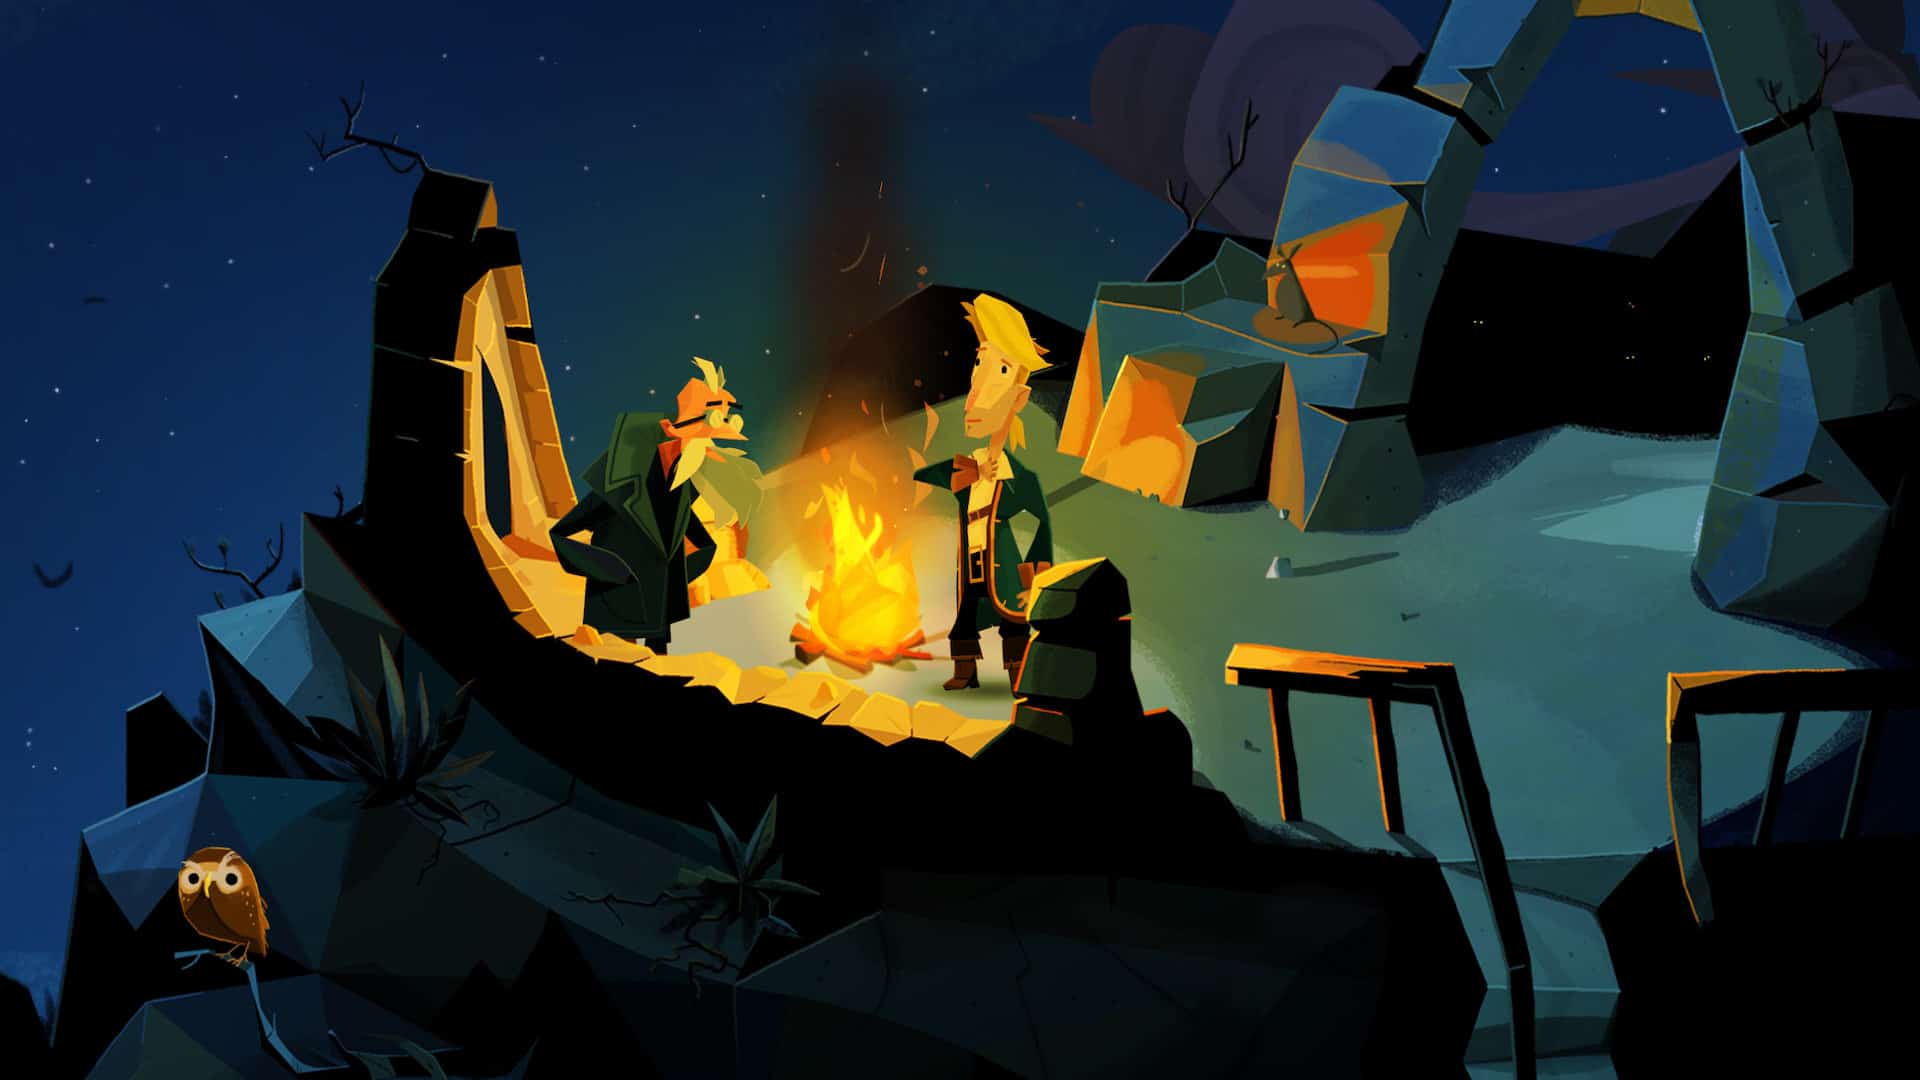 Return to Monkey Island gets a new gameplay trailer and is confirmed for Nintendo Switch